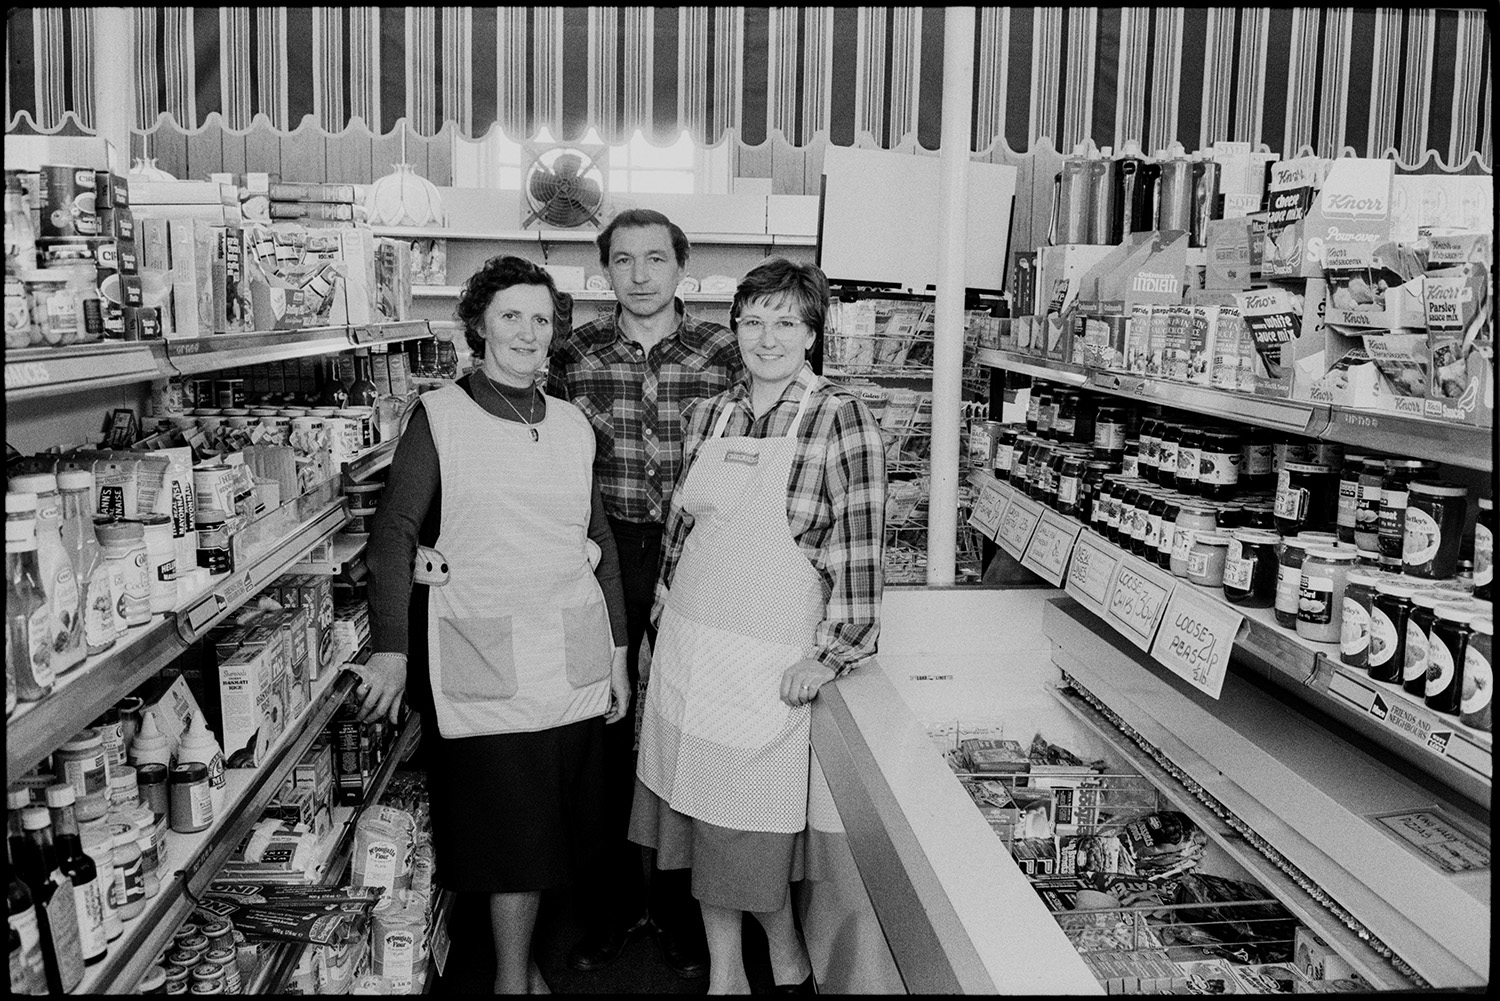 Shopkeepers in village store, customers, women buying at till.
[Three shopkeepers in the village shop at Winkleigh standing in an aisle with various jars and packets of food displayed on shelves and in a freezer cabinet.]